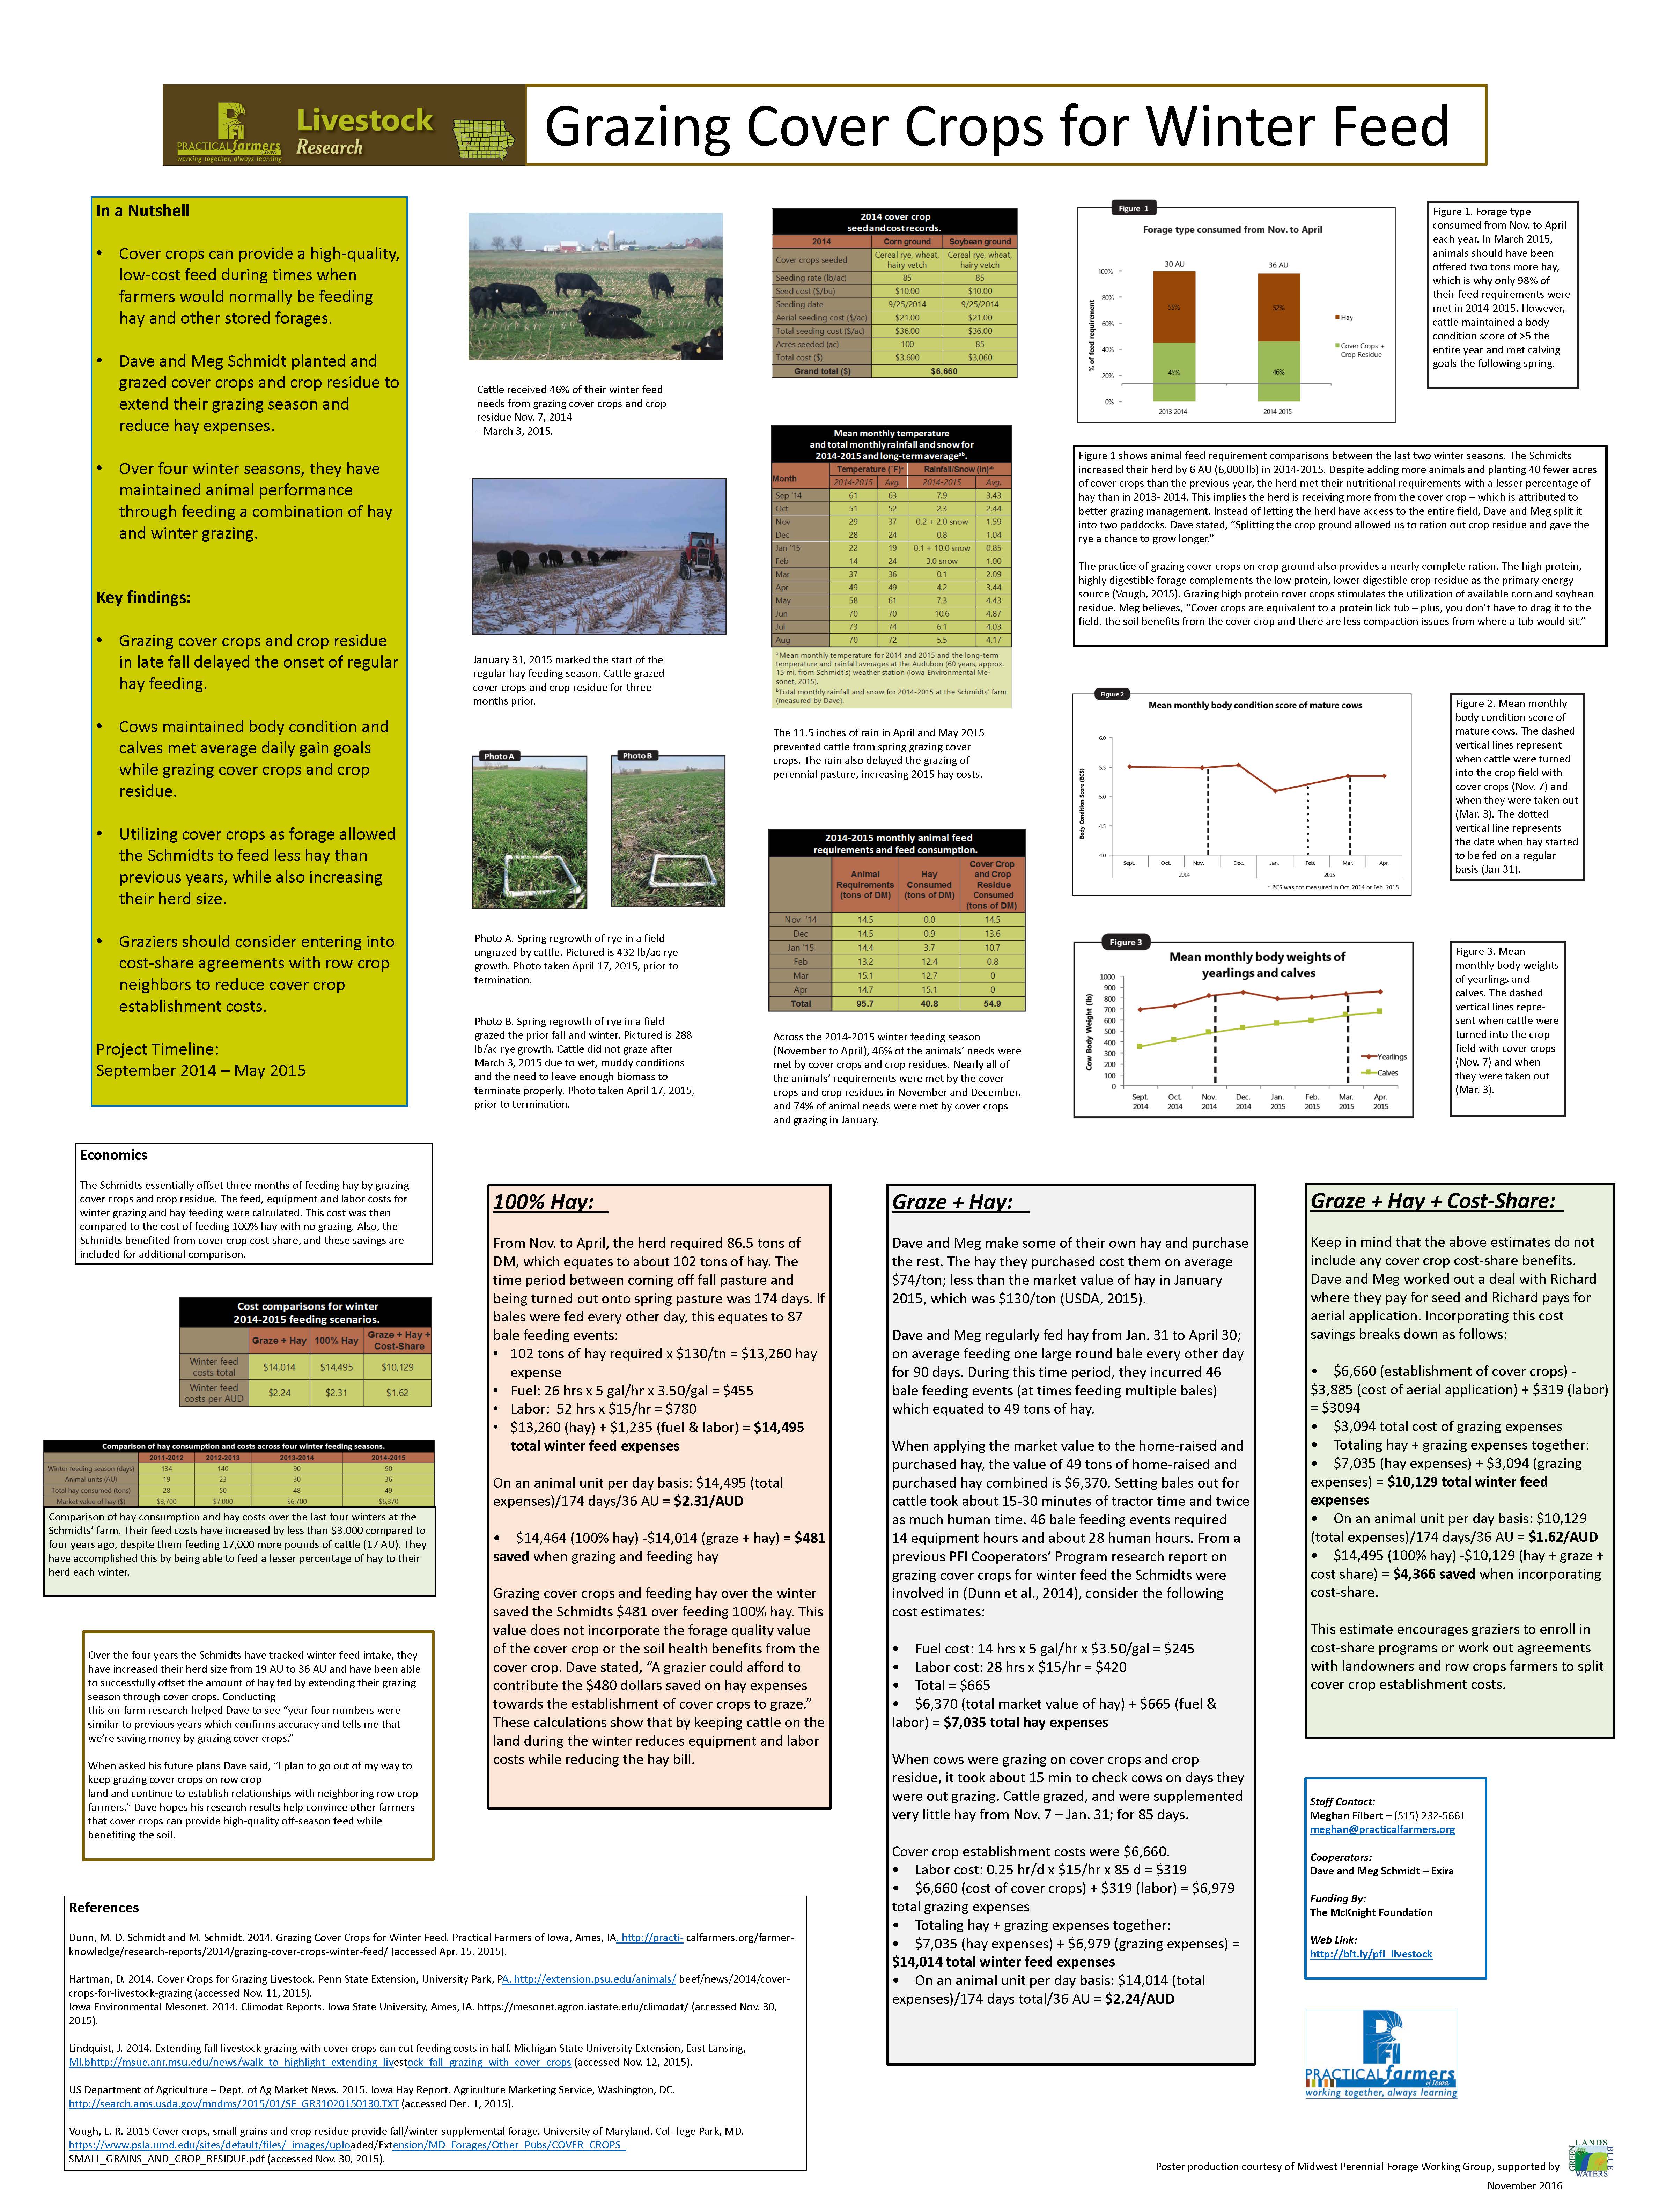 Practical Farmers of Iowa Grazing Cover Crops poster from 2016 Green Lands Blue Waters conference